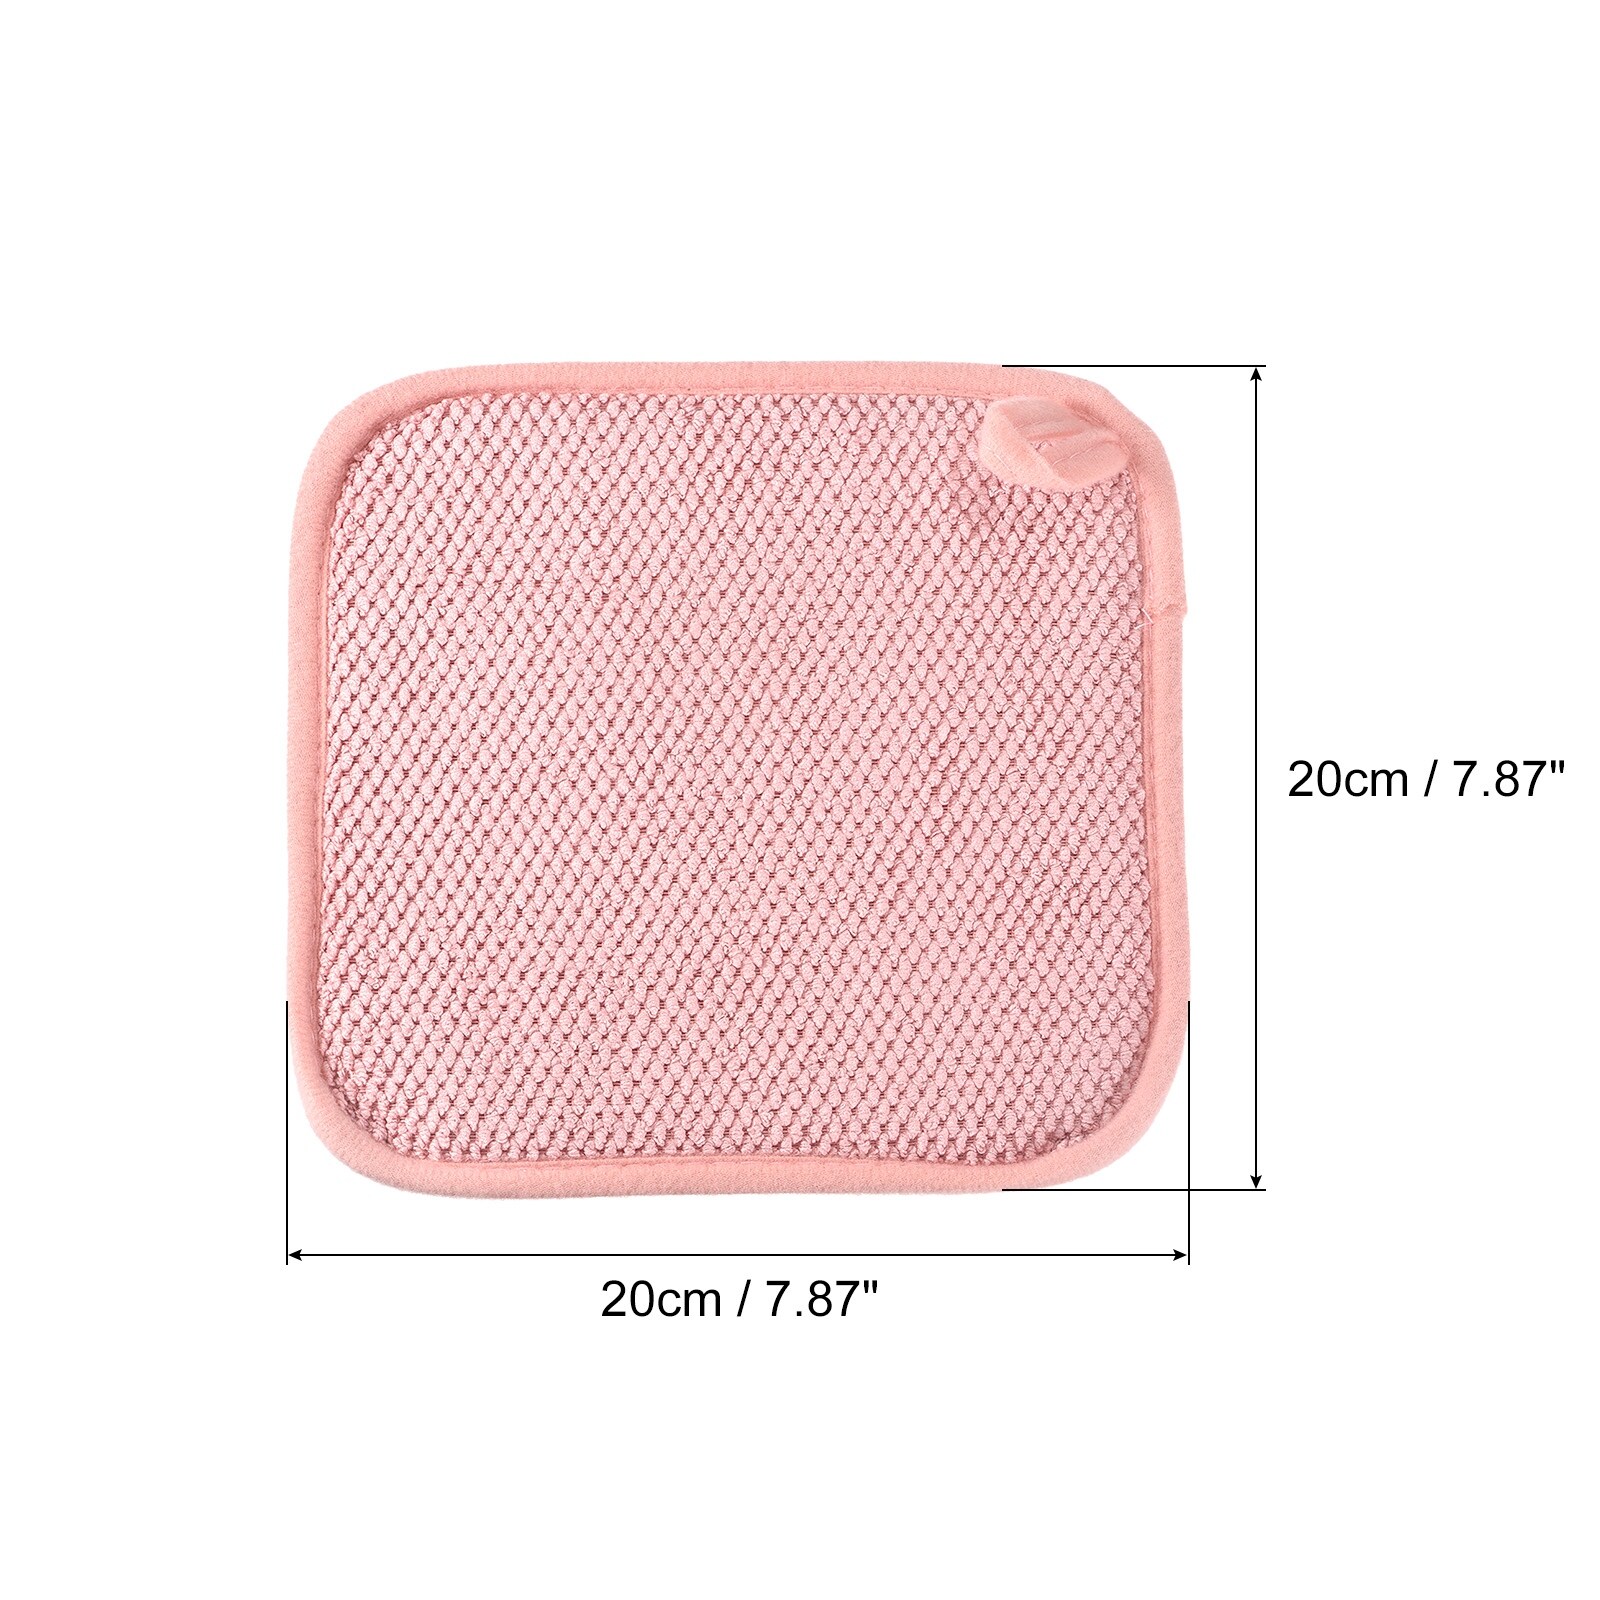 https://ak1.ostkcdn.com/images/products/is/images/direct/bee3a7e84f8334401ea389e3c4a5ab43dc48721c/2pcs-Dish-Drying-Mat-Microfiber-Dishes-Drainer-Mats-Dish-Drying-Pad-Red.jpg